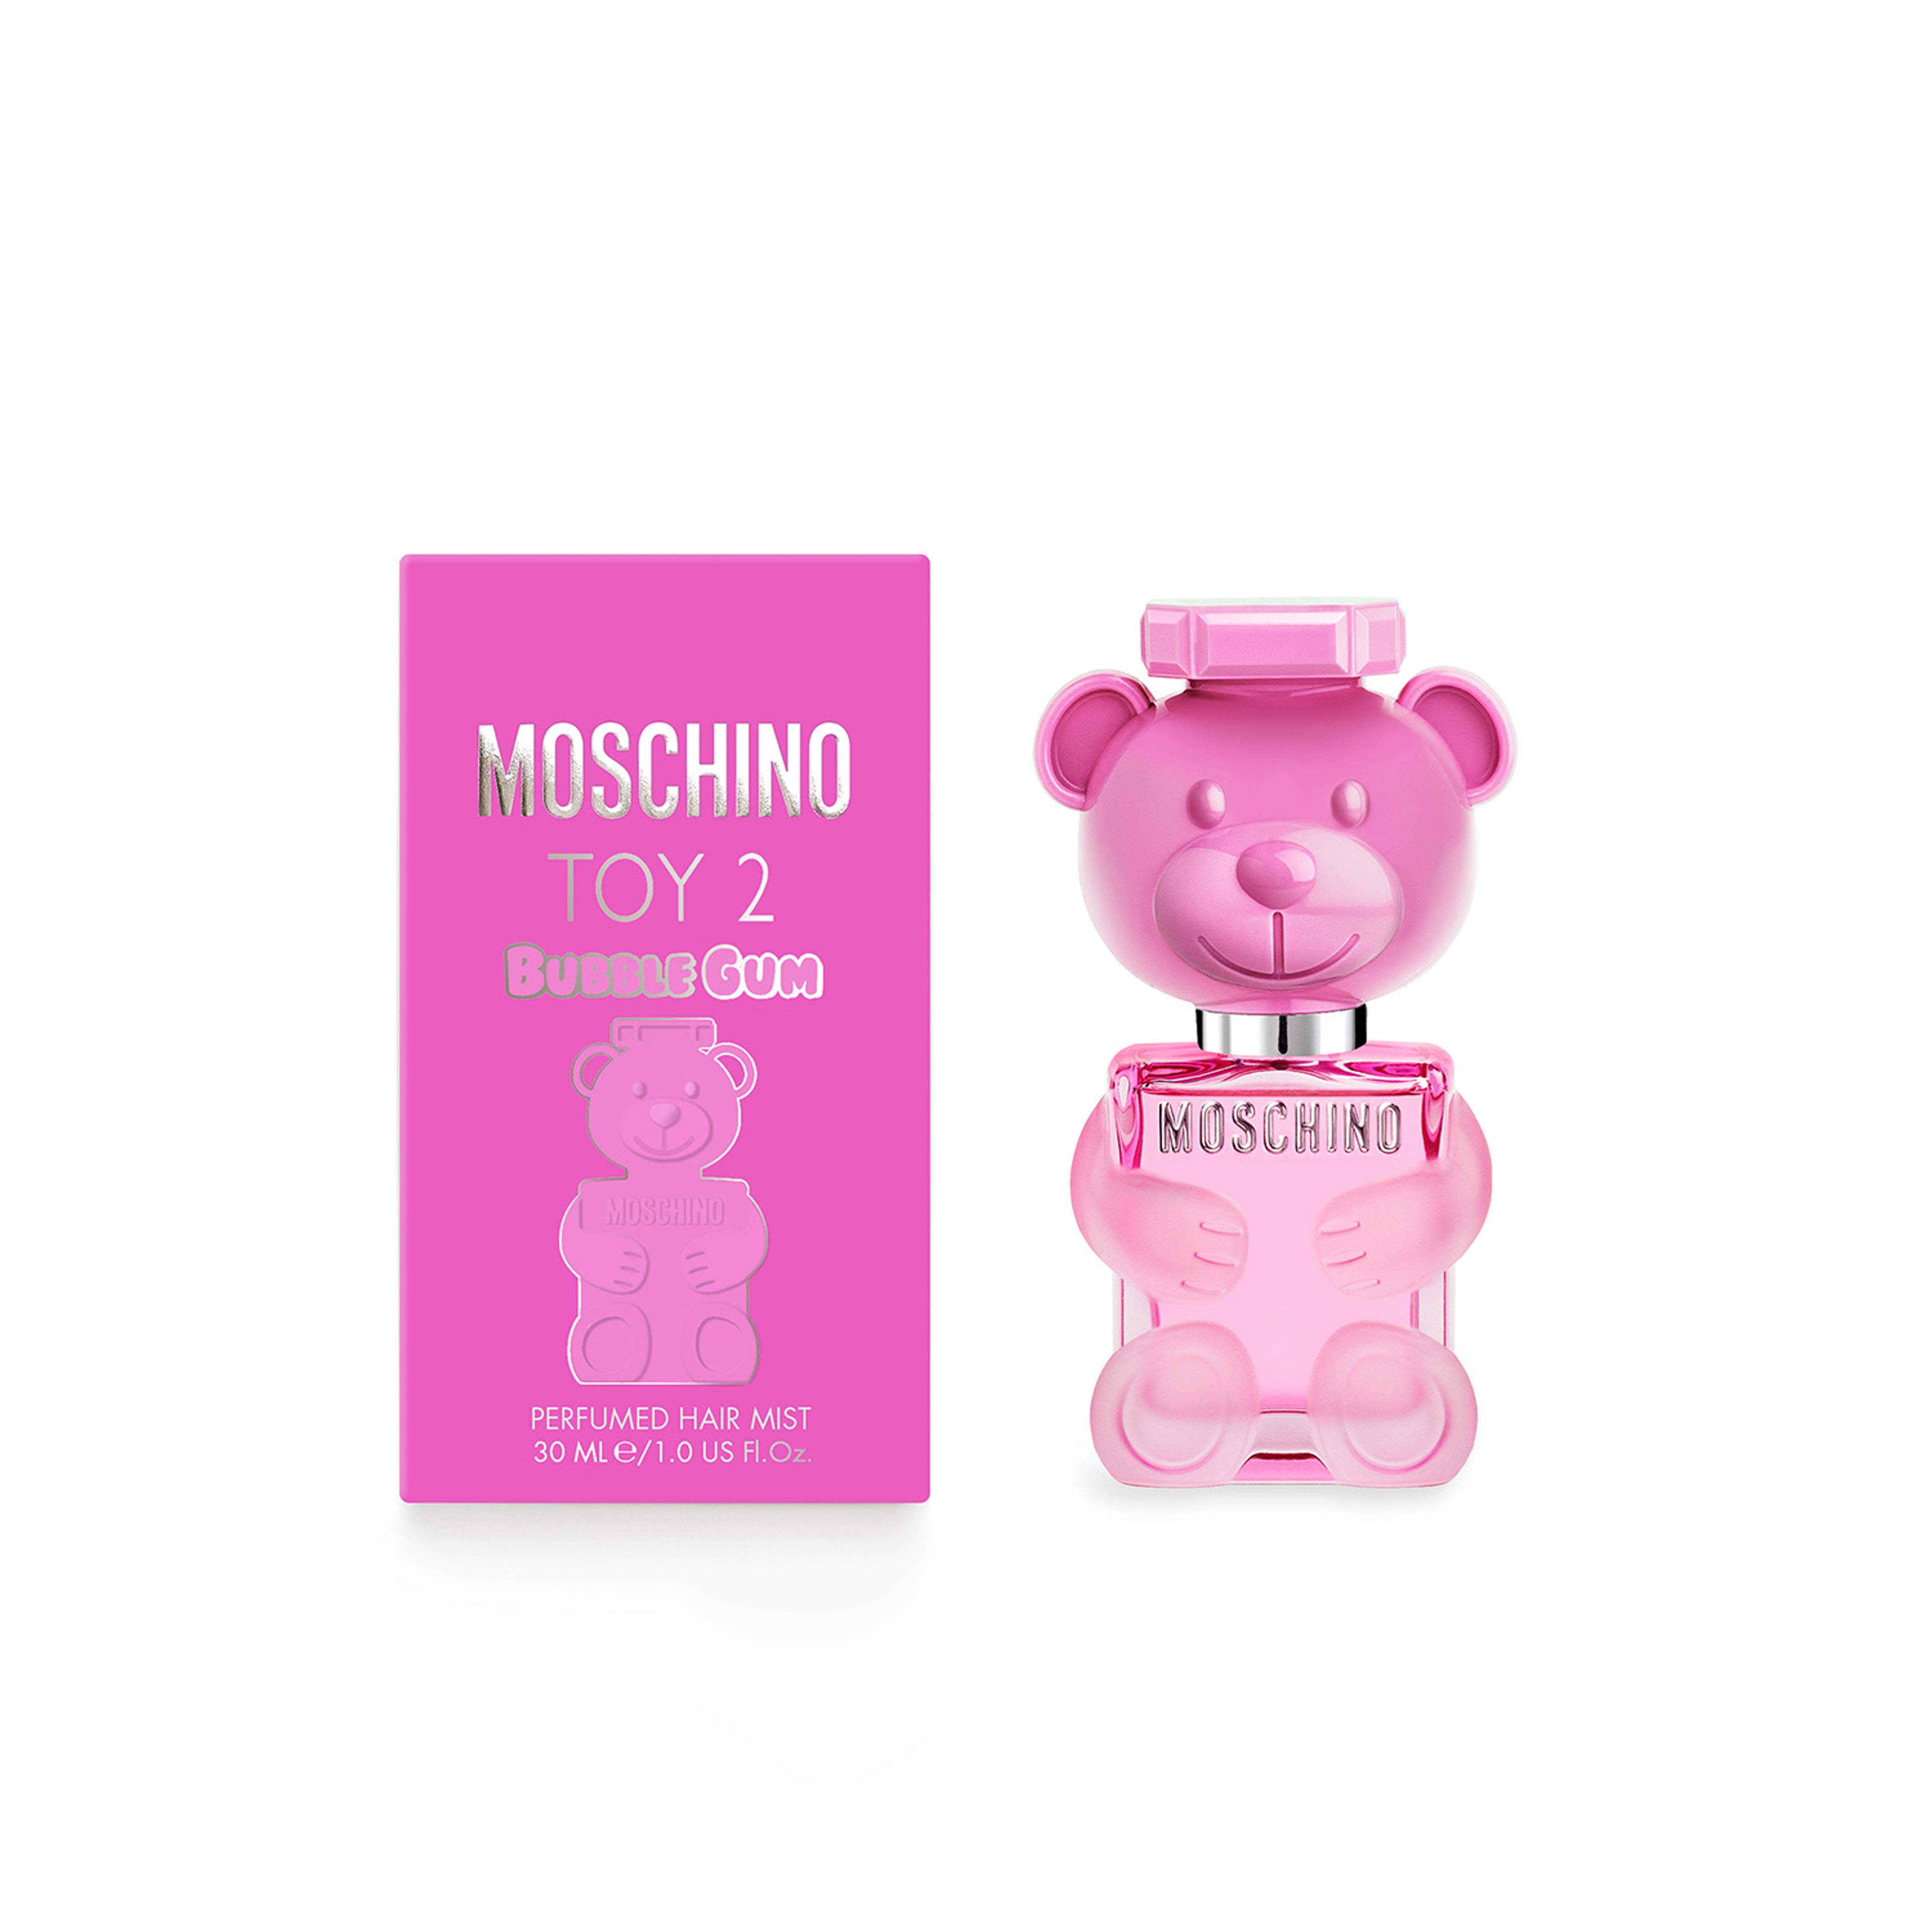 Moschino Toy 2 Bubble Gum Perfumed Hair Mist Moschino 2